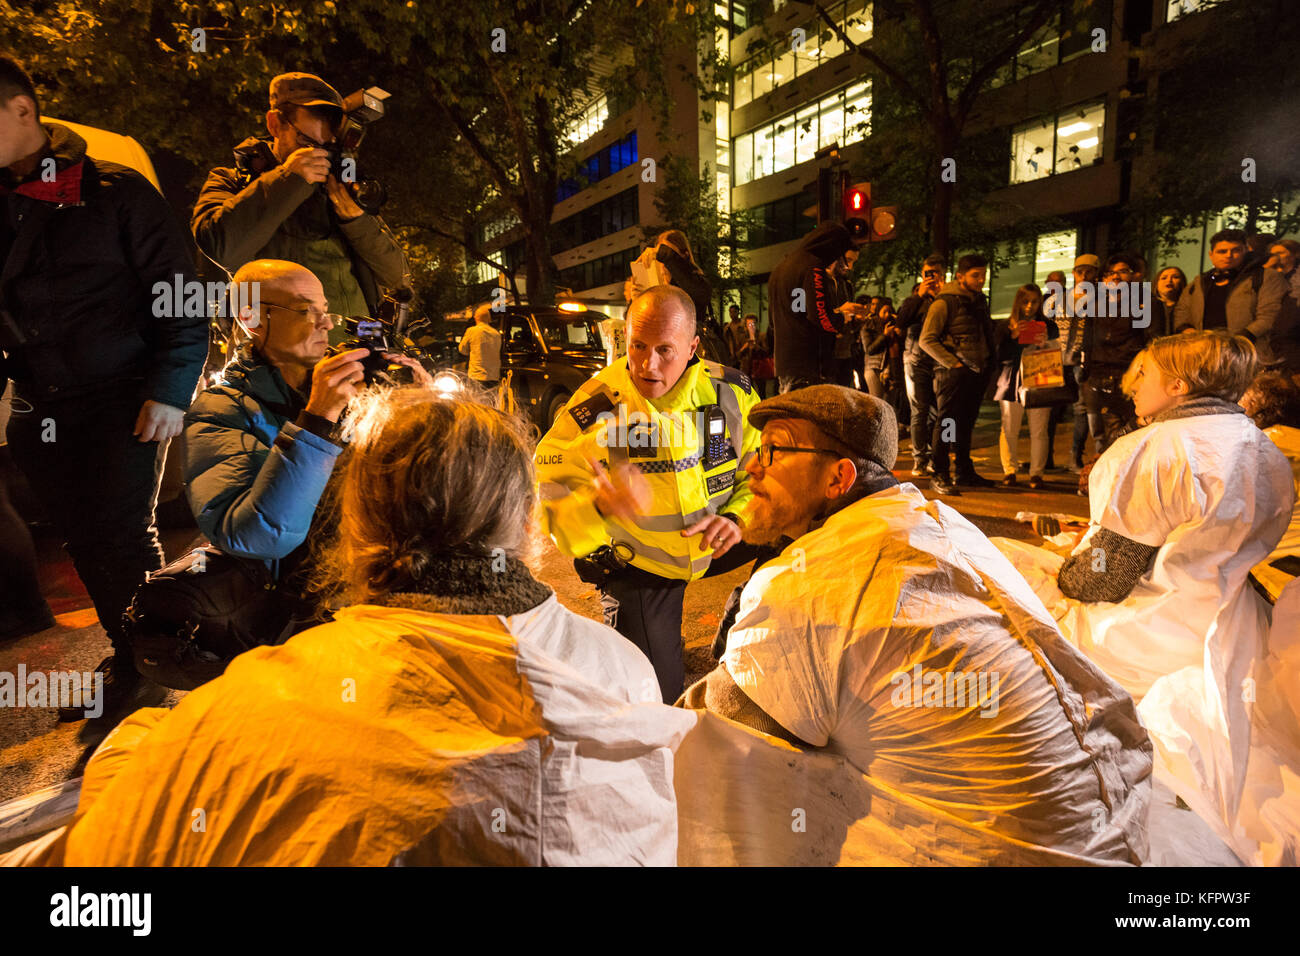 London, UK. 31st Oct, 2017. ‘Stop Killing Londoners’ environmental campaign activists perform a direct action road block in Baker Street during evening rush hour to demand urgent attention to prevent premature deaths from increasing city air pollution. Credit: Guy Corbishley/Alamy Live News Stock Photo